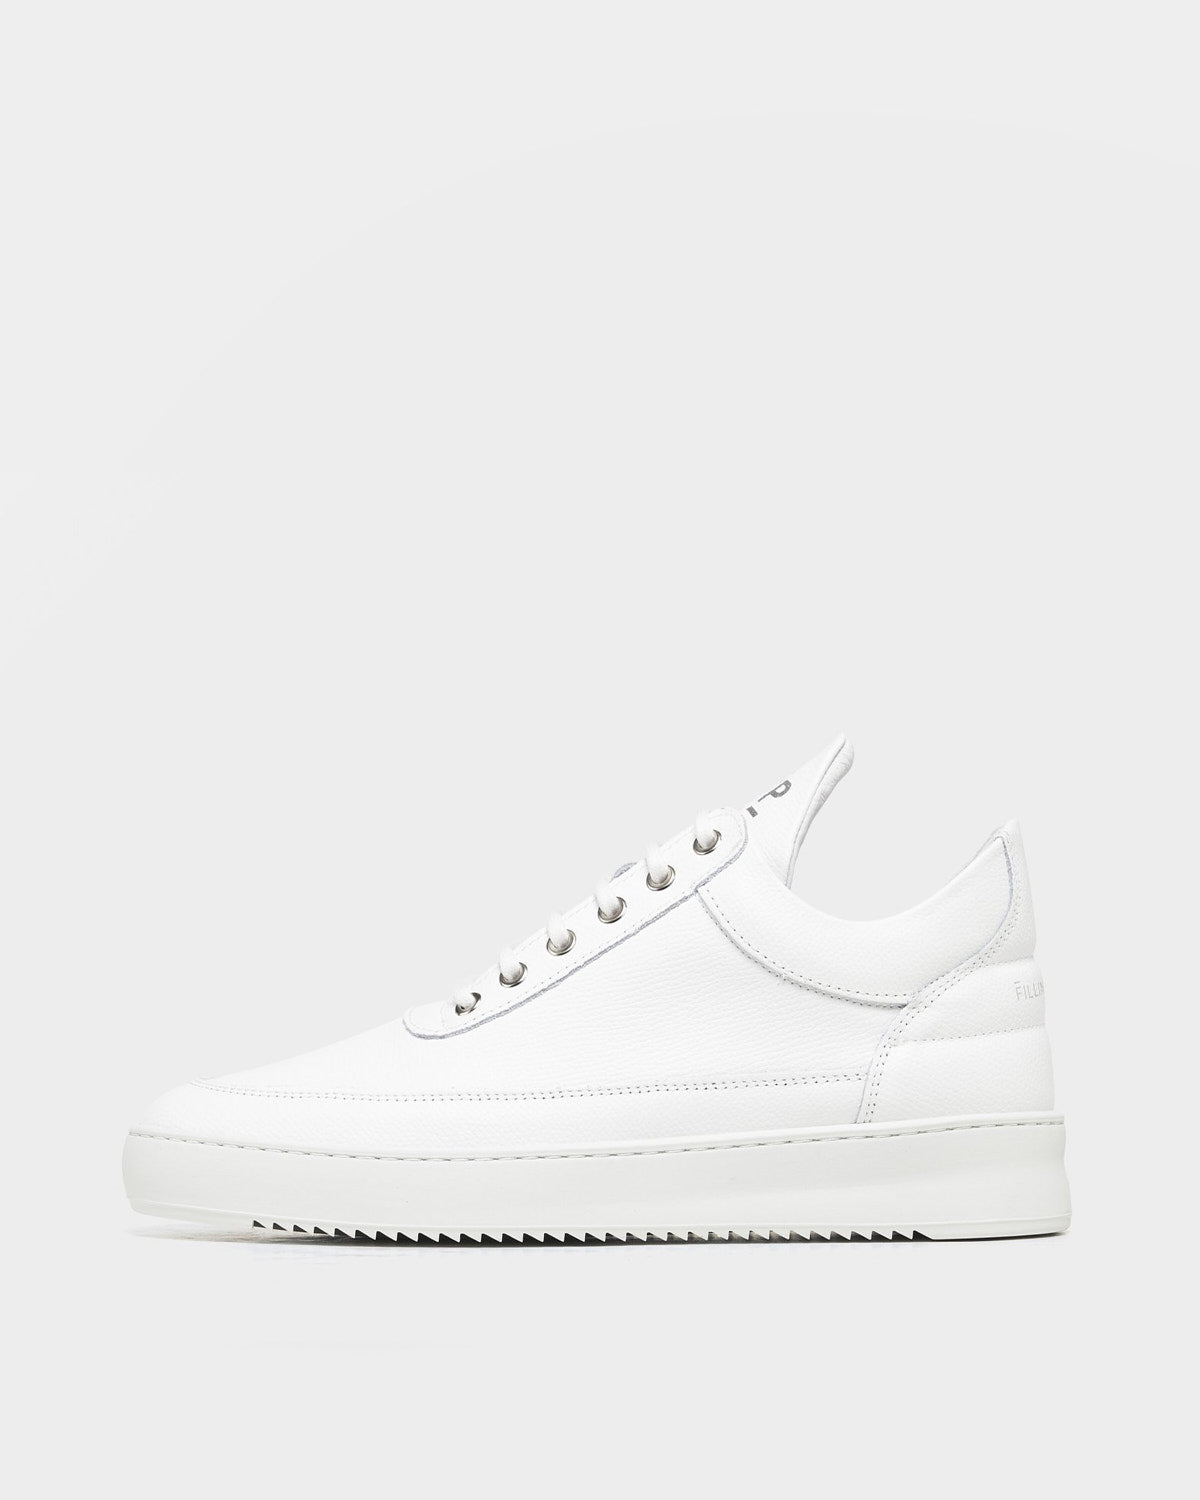 Low Top Ripple Crumbs All White - Filling Pieces